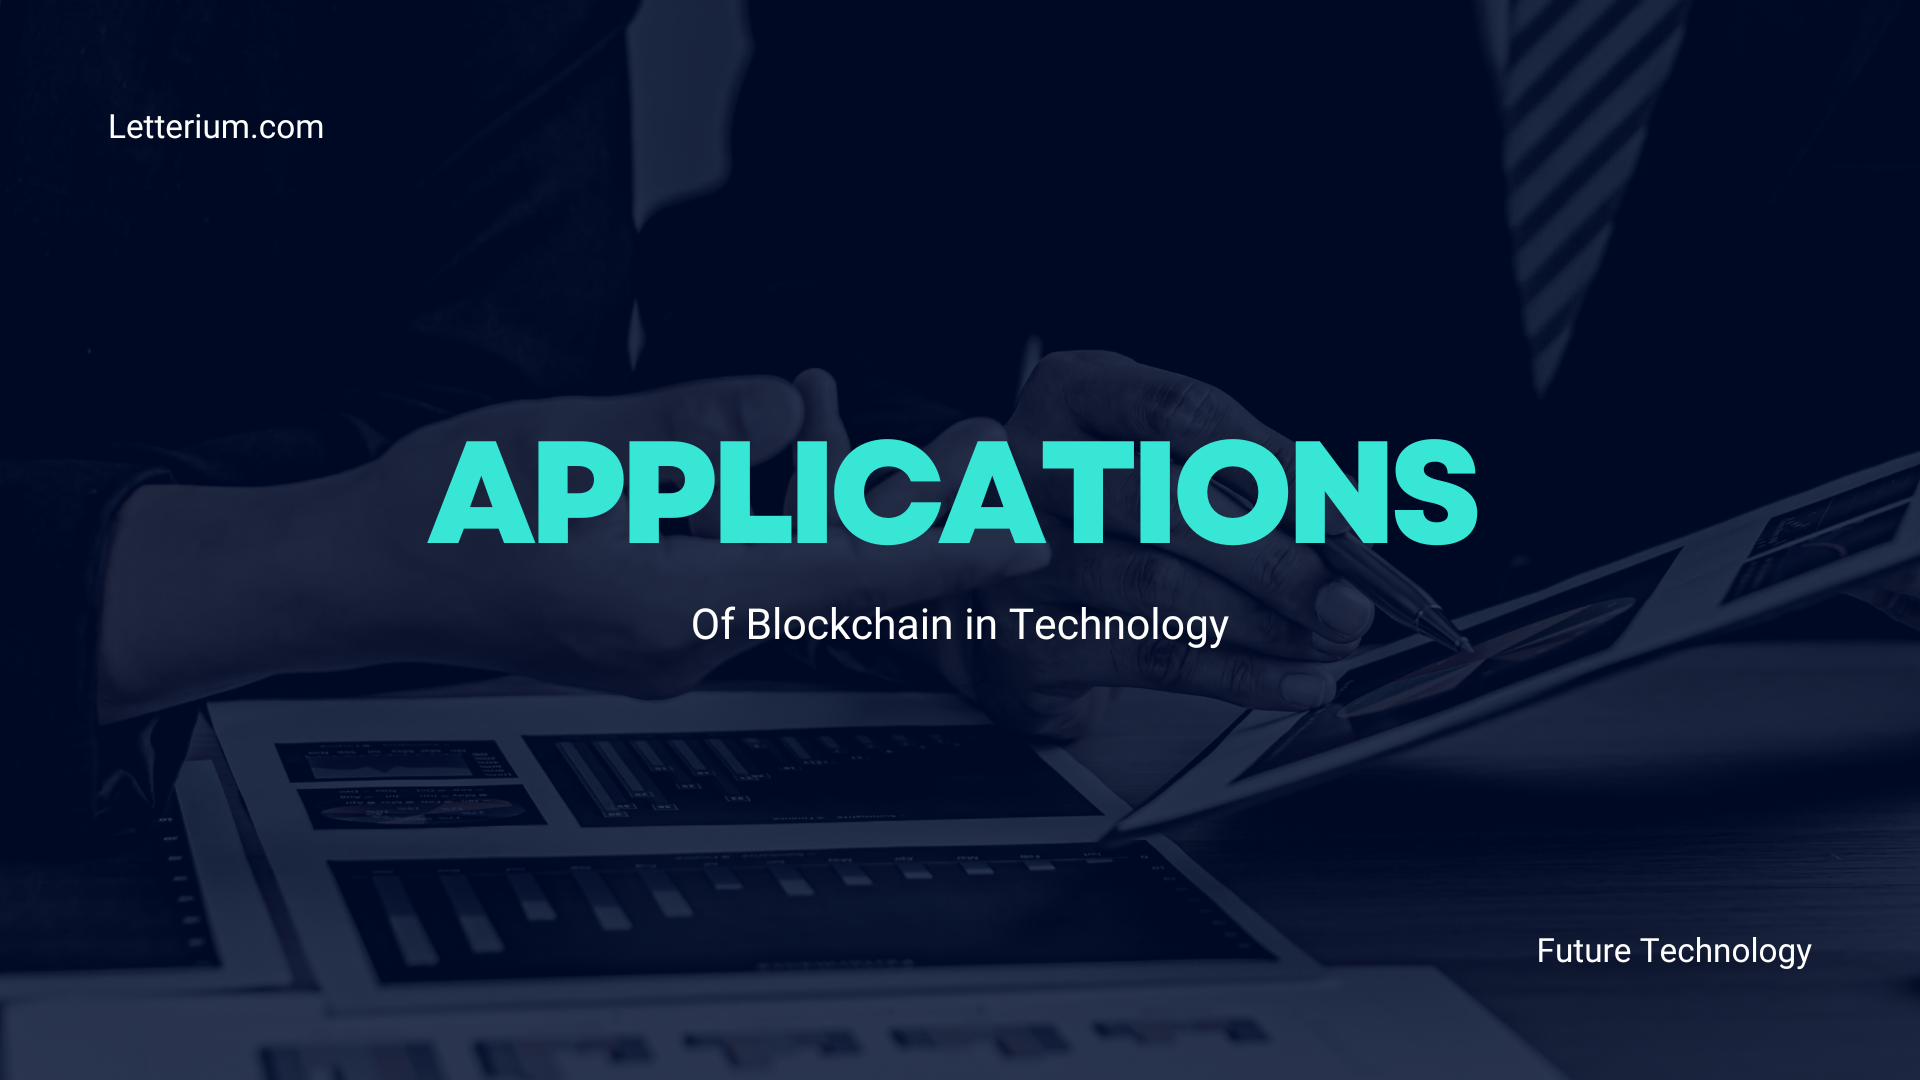 Applications of Blockchain in Technology